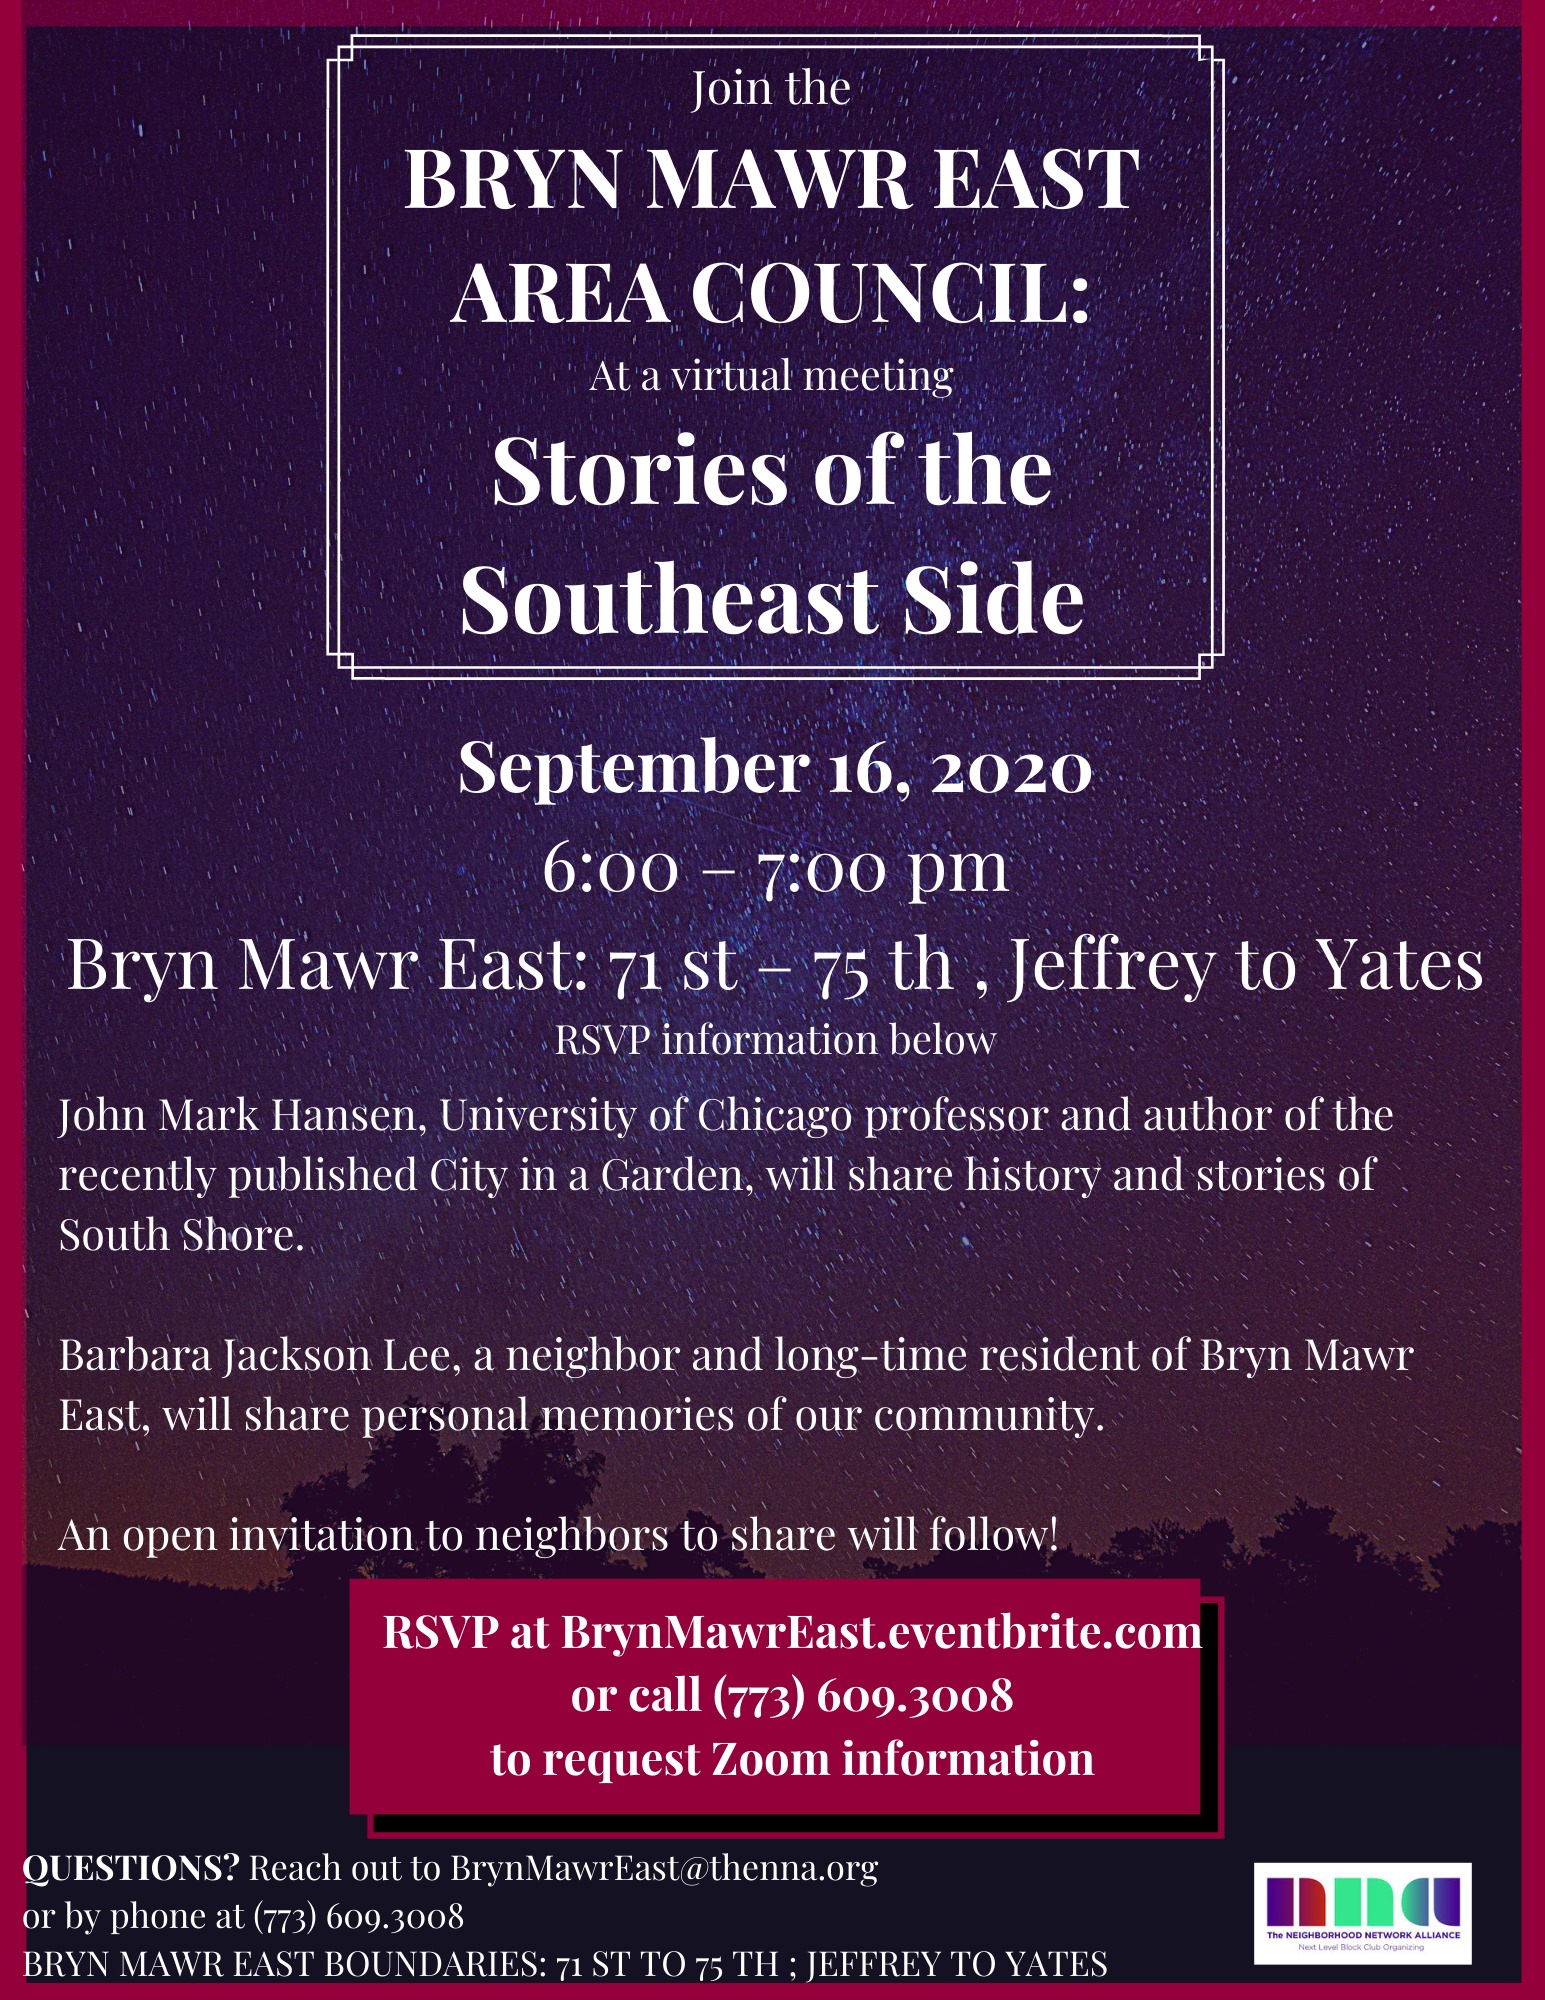 Info Shared by April S. Williams-Luster, Bryn Mawr East Boundaries: 71st - 75th; Jeffrey to Yates Wednesday, September 16, 2020 6:00 - 7:00 pm